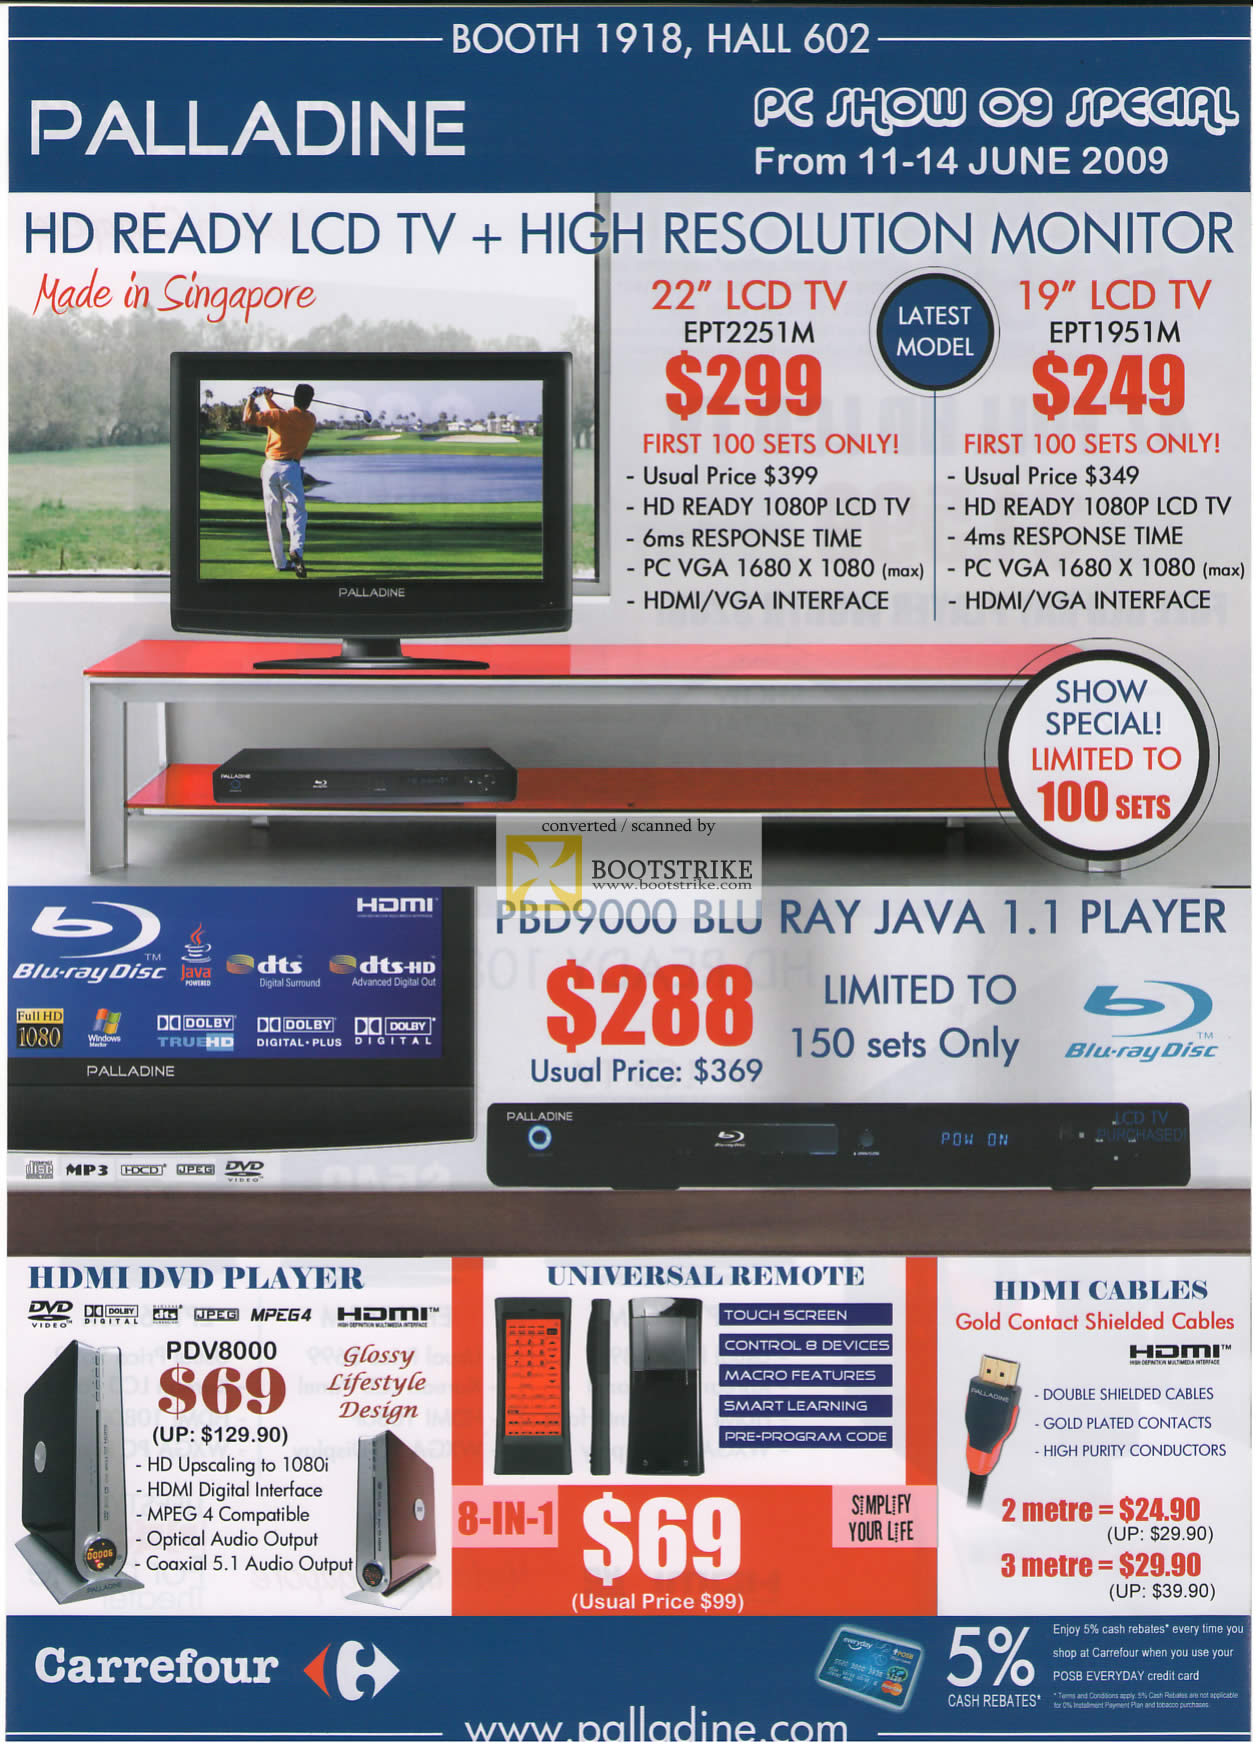 PC Show 2009 price list image brochure of Palladine LCD TV Blu Ray HDMI DVD Player Cable